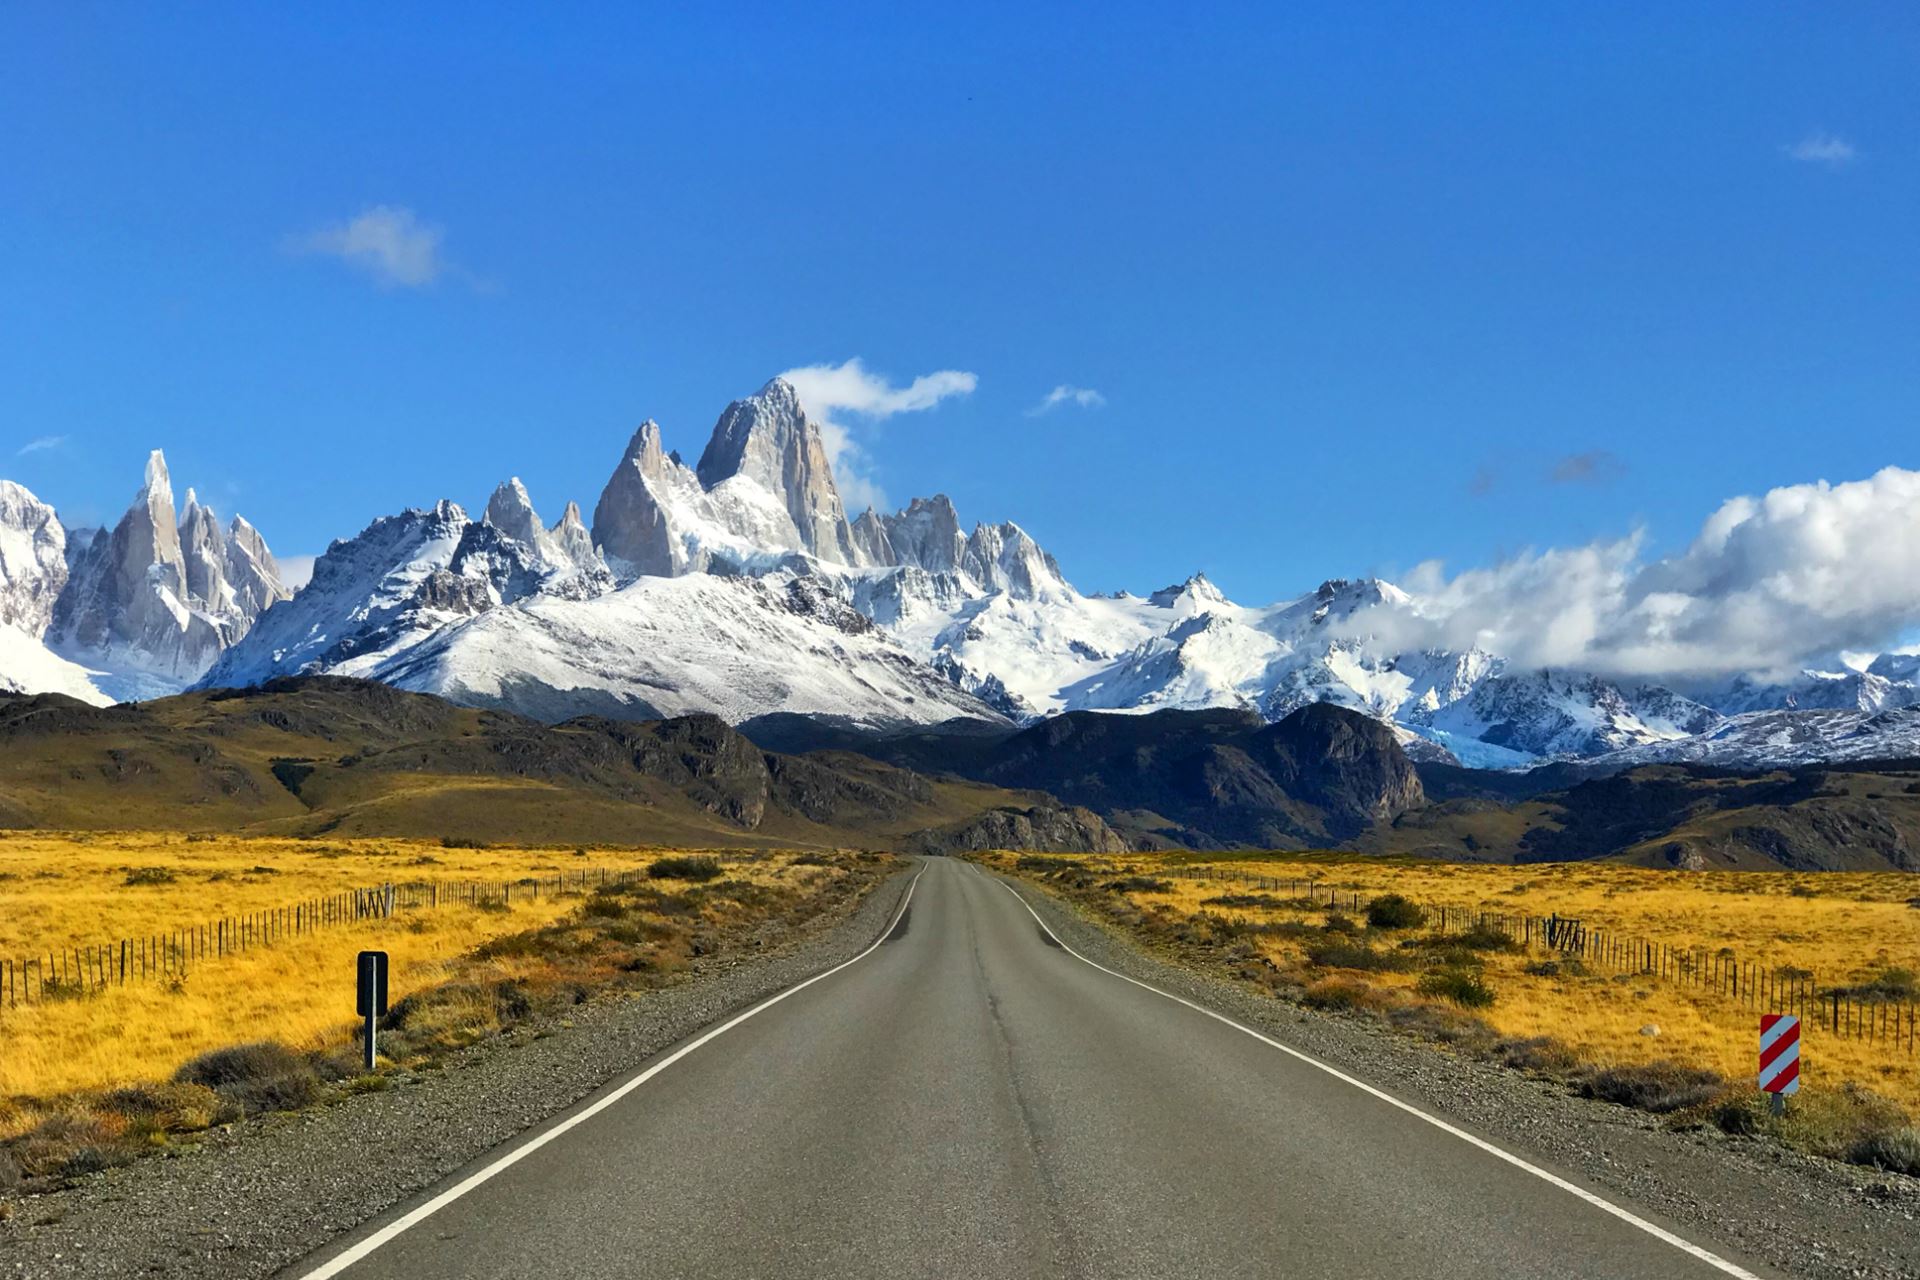 What to do in El Chaltén